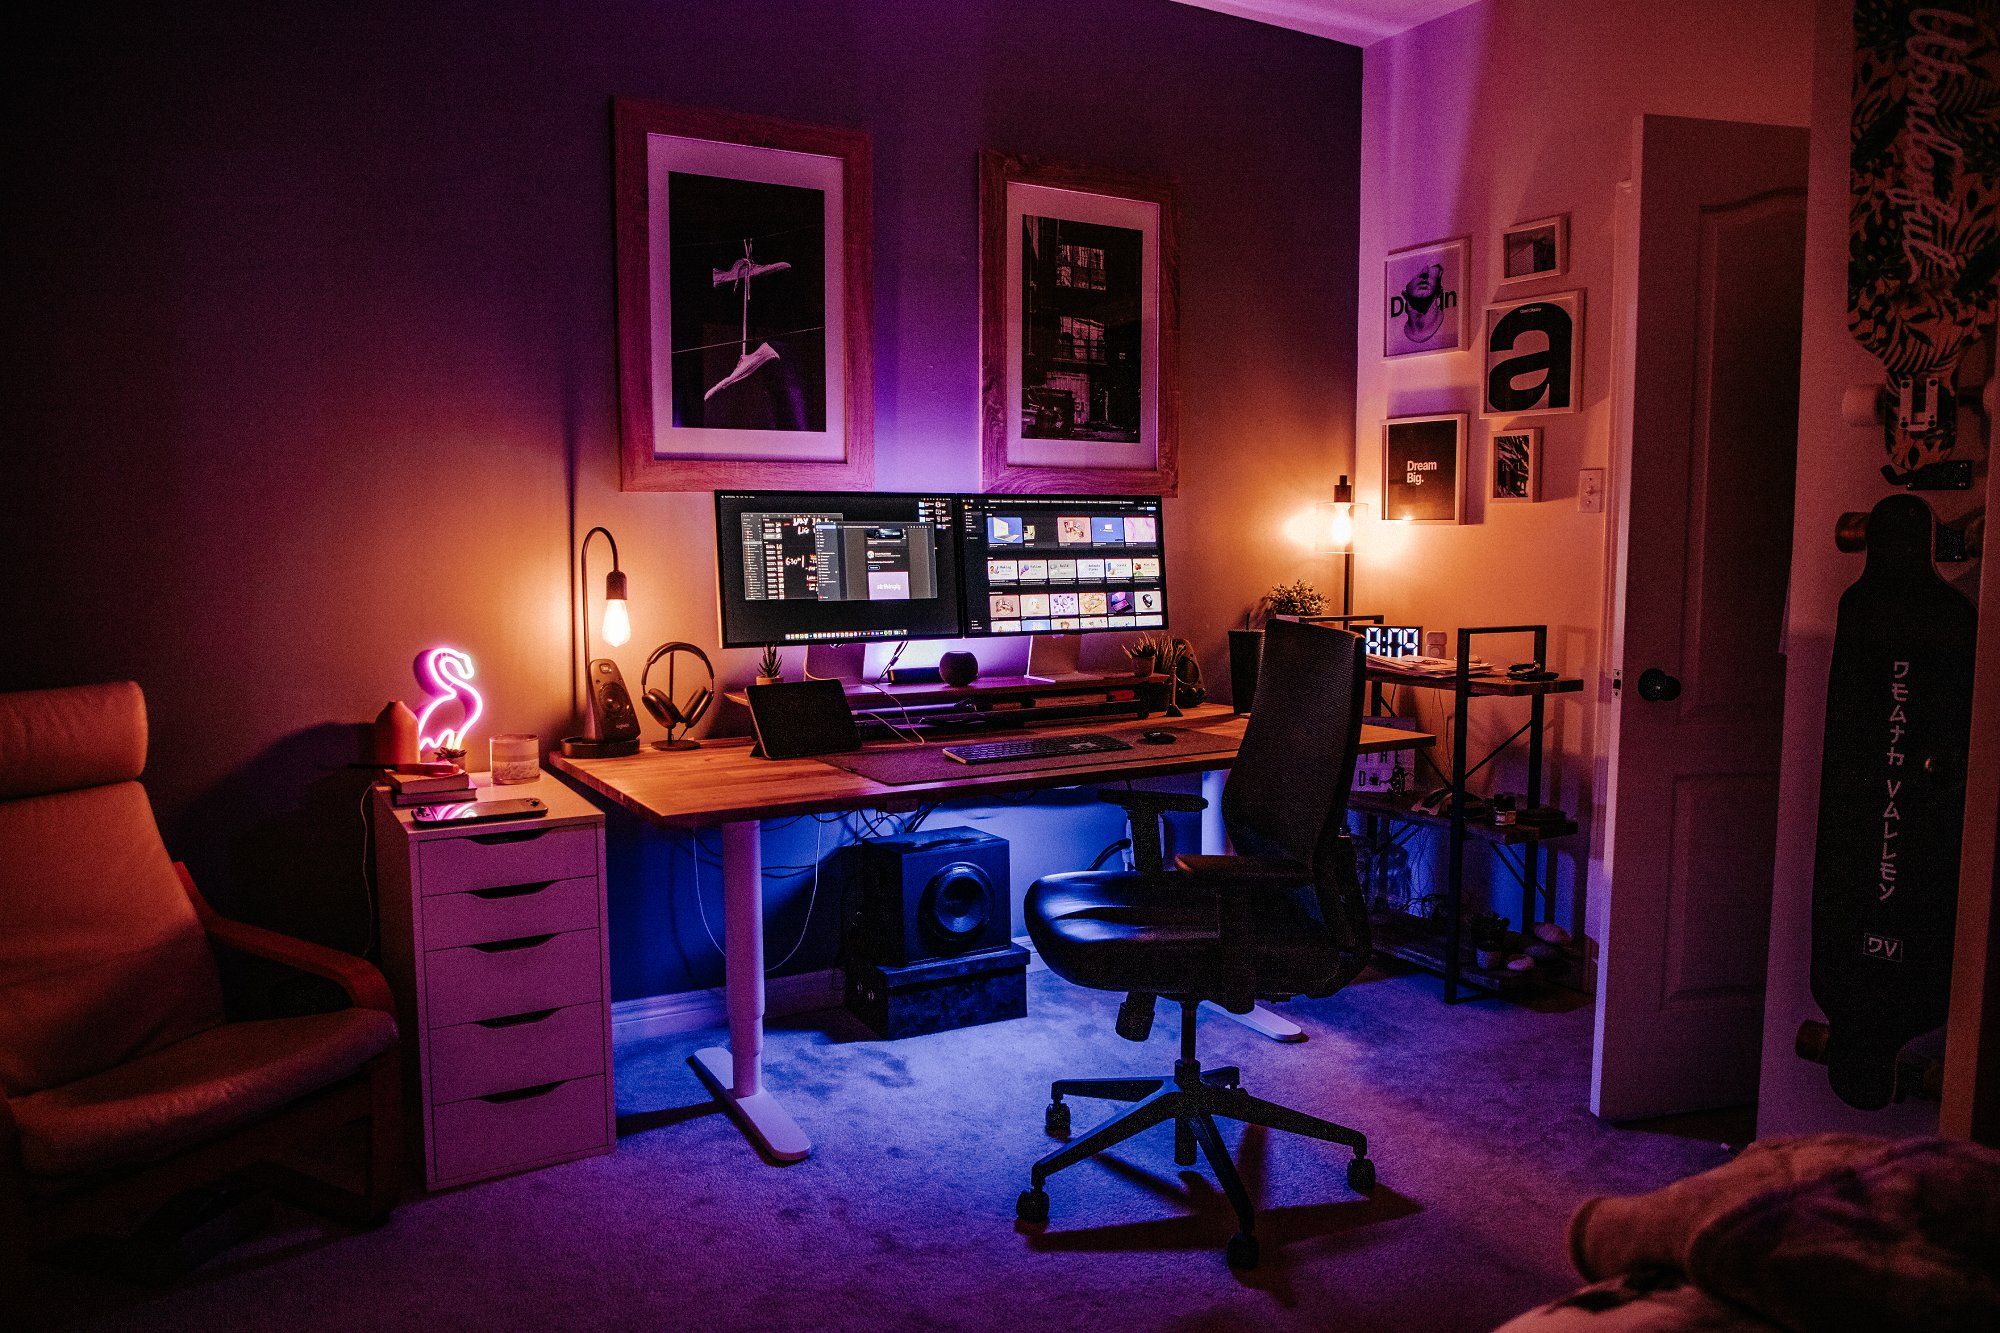 Moody lighting in a creative home office at night